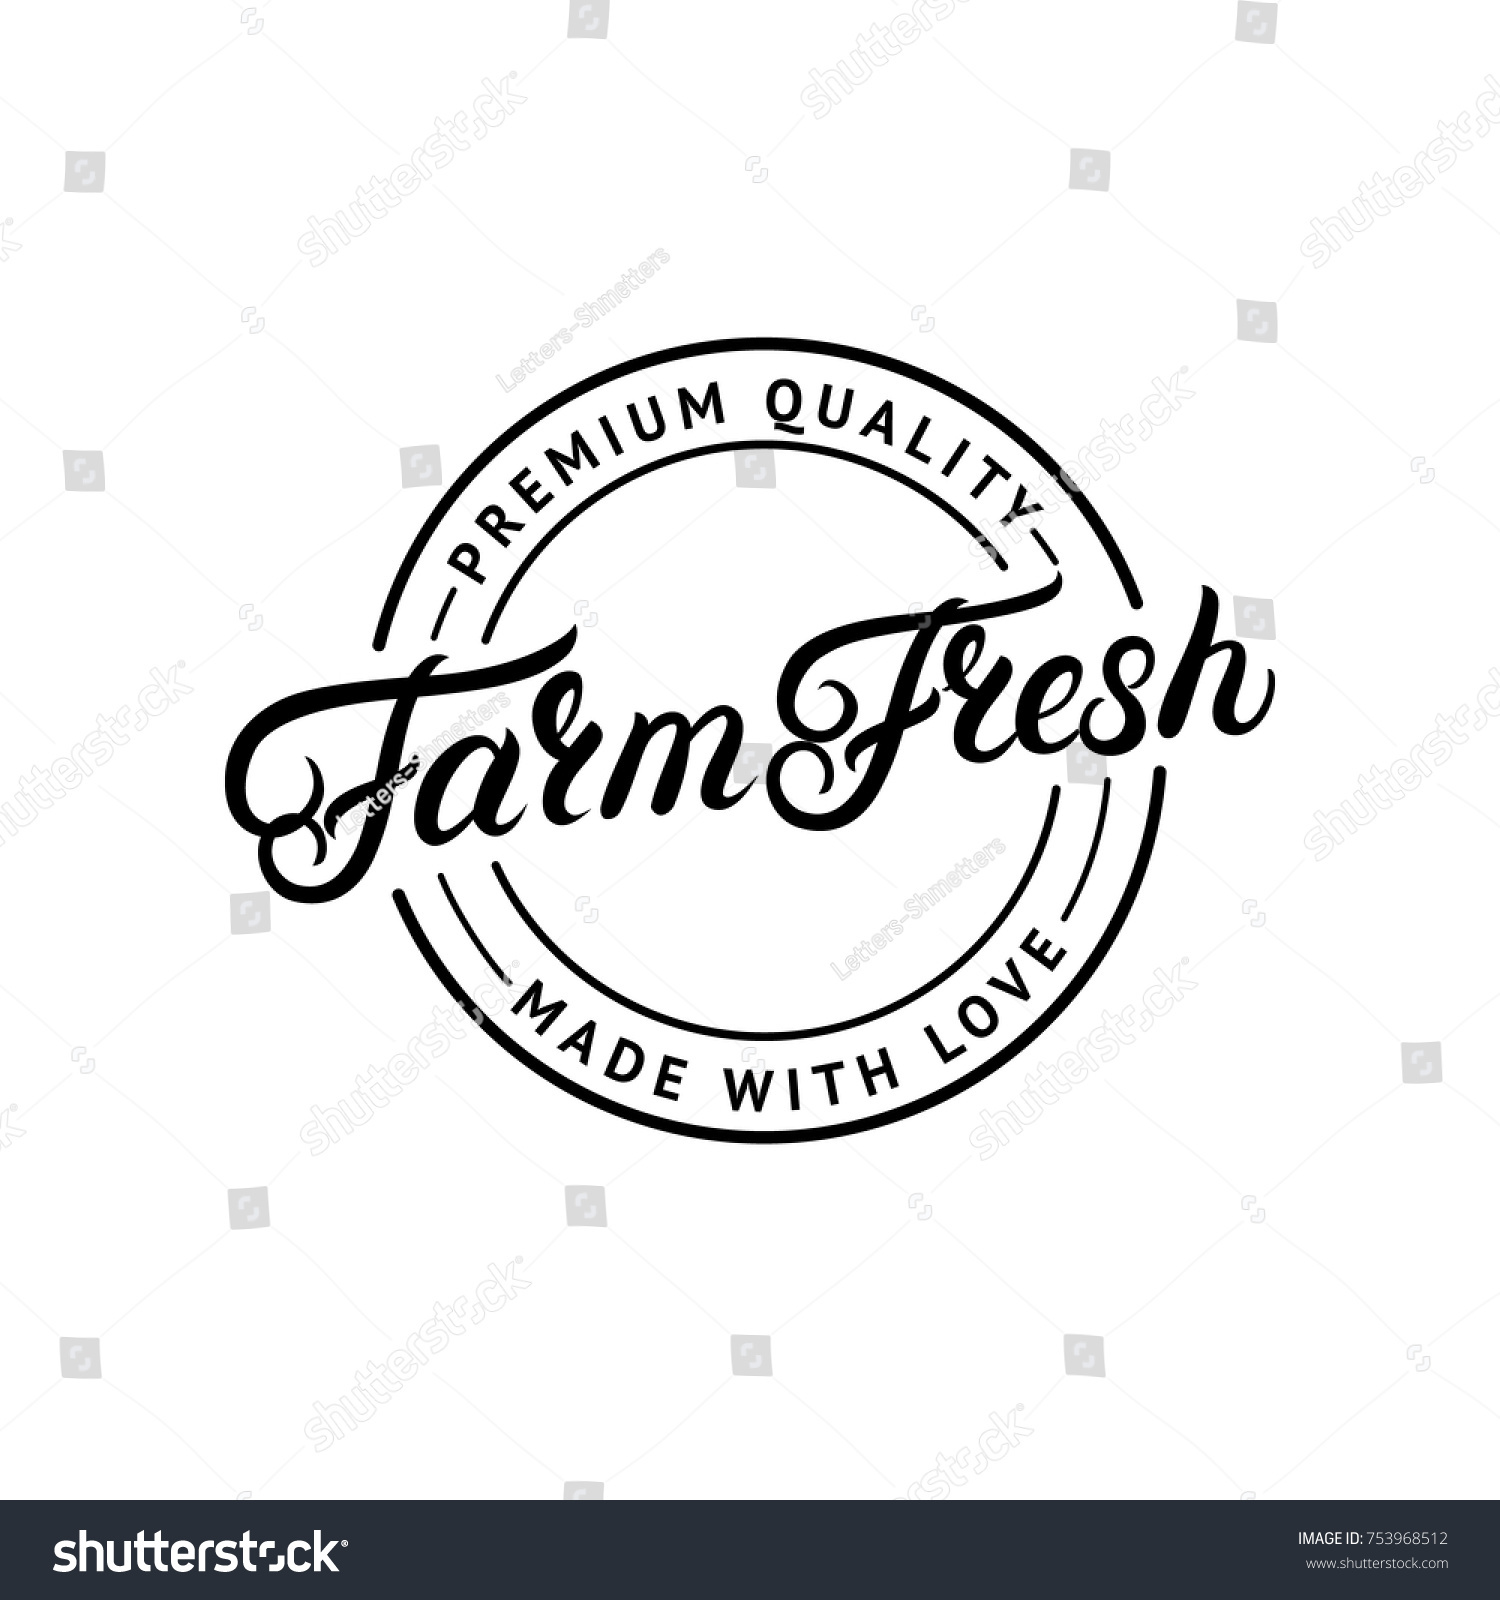 Farm Fresh hand written lettering logo, label, badge, emblem for organic food, products packaging, farmer market. Vintage retro style. Calligraphic inscription. Isolated. Vector illustration. #753968512